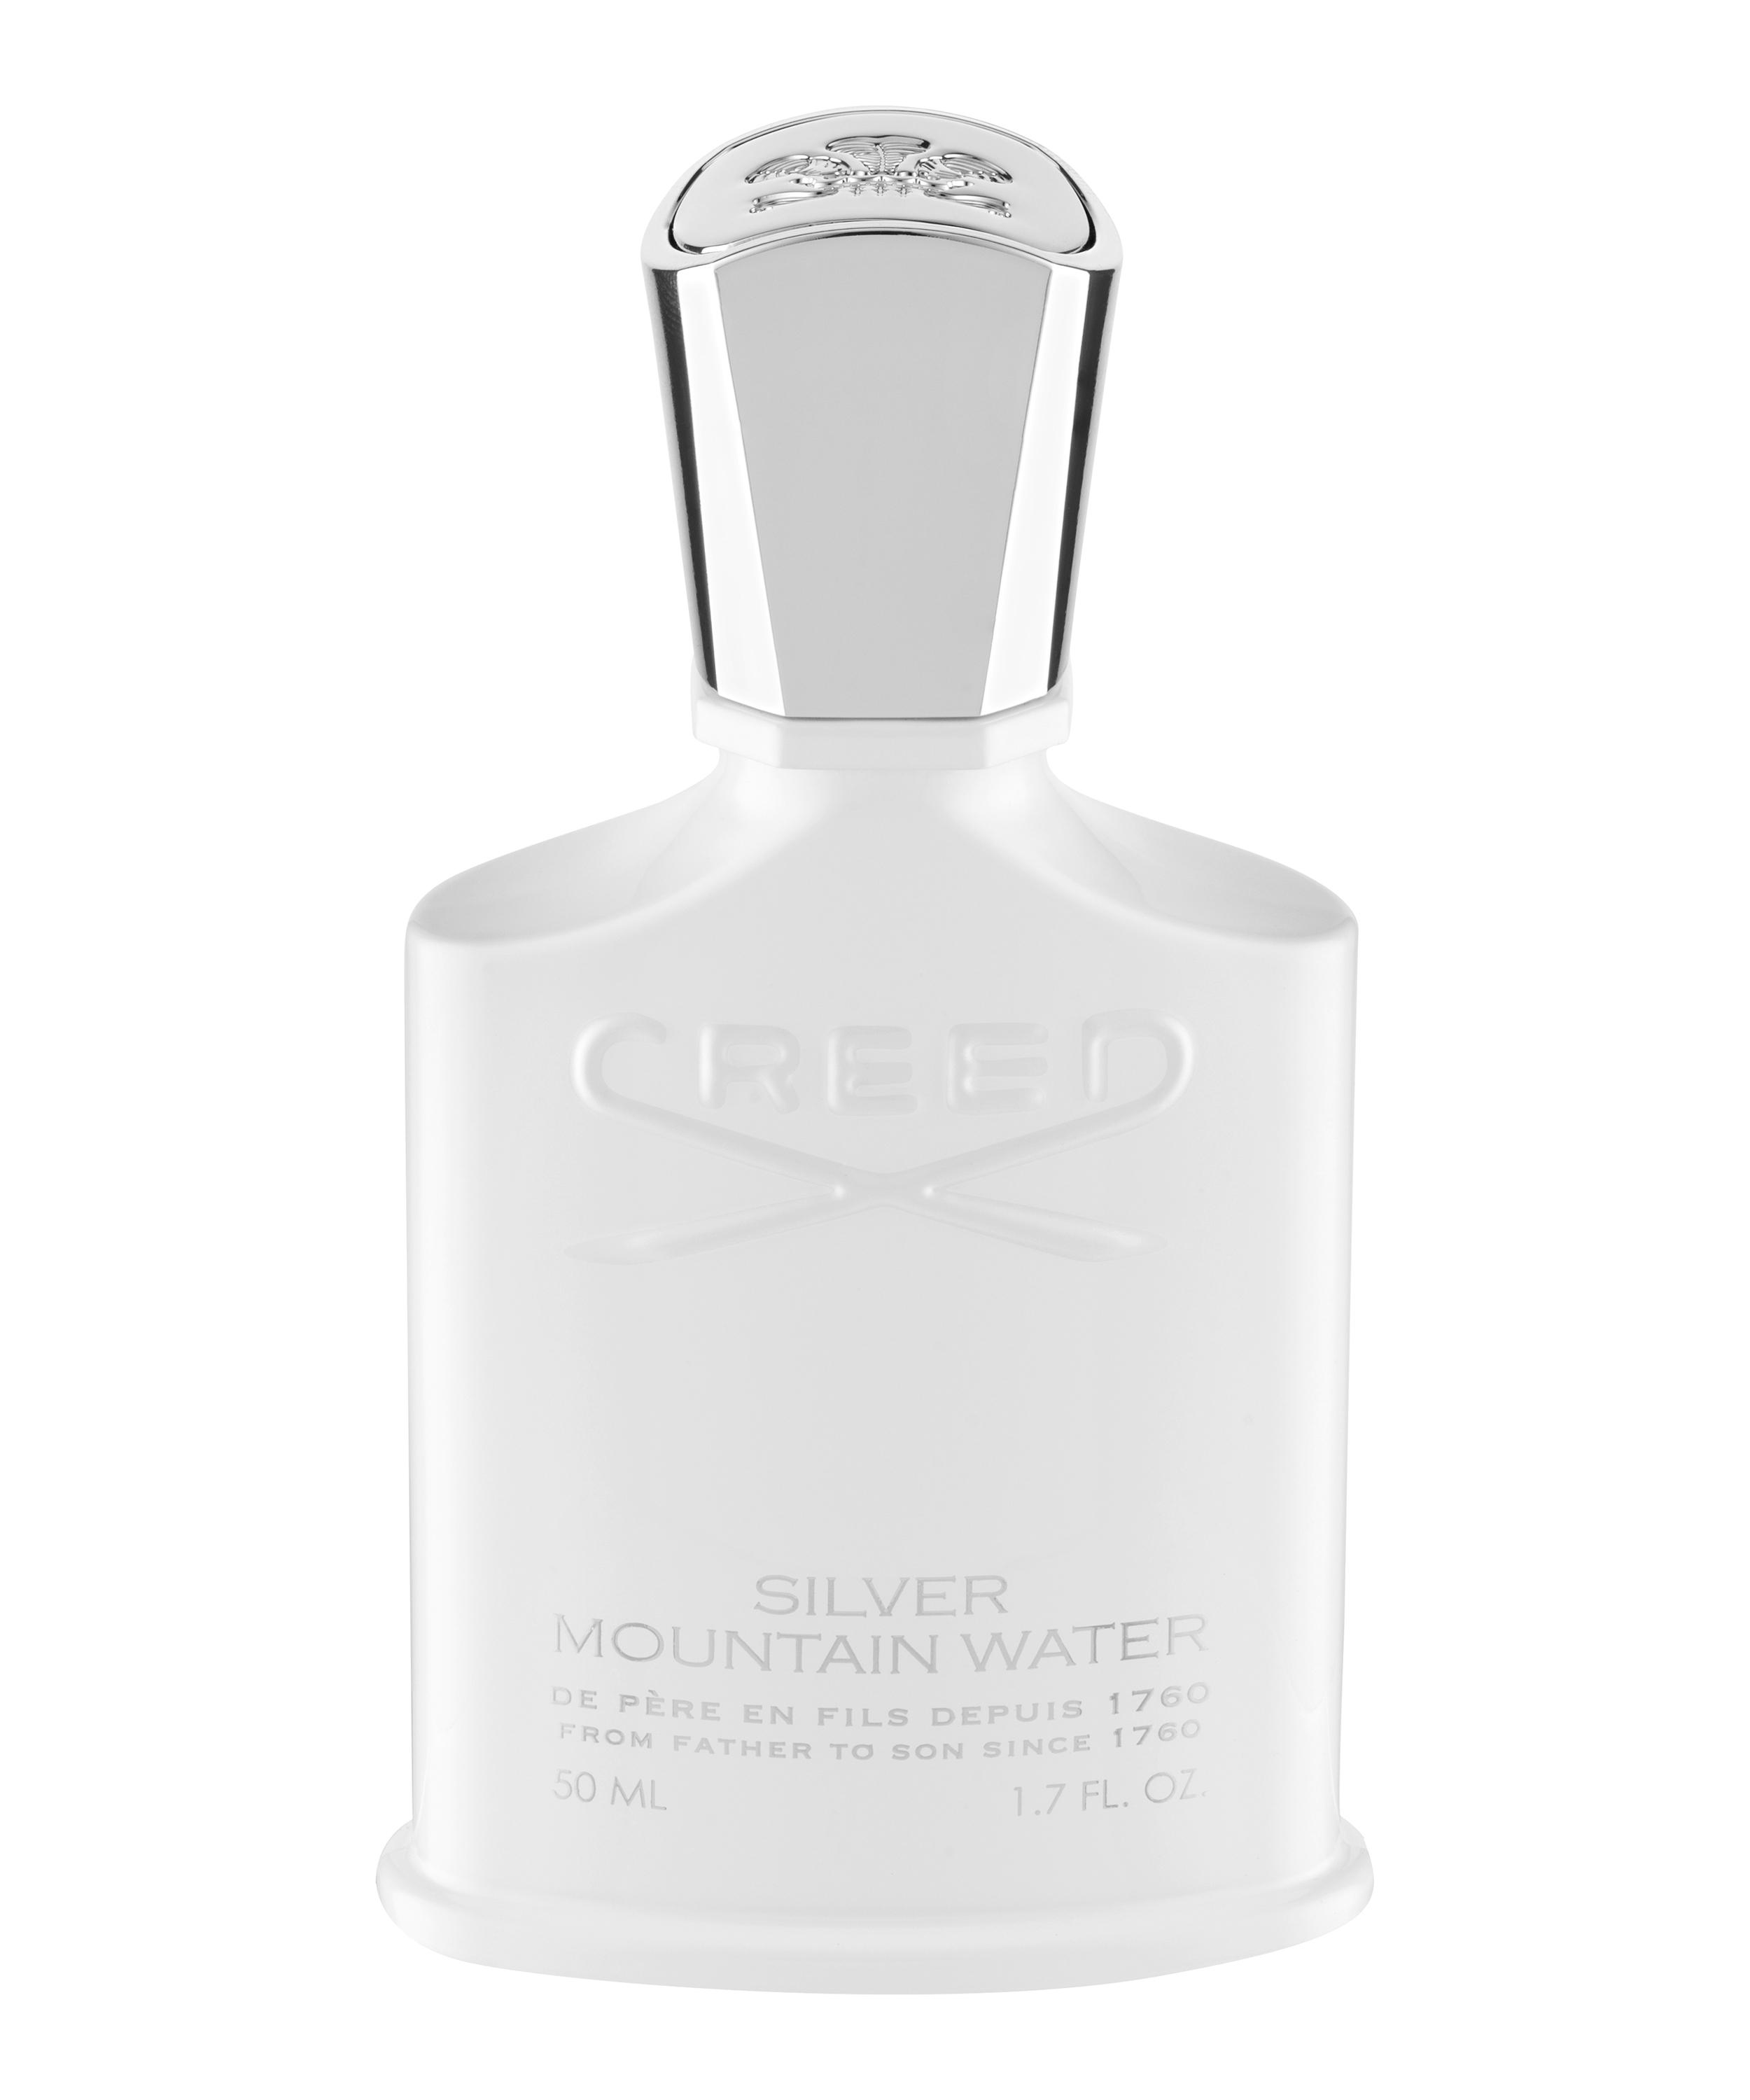 Creed парфюмерная вода silver mountain. Silver Mountain (Creed) 100мл. Silver Mountain Water Eau de Parfum Creed. Creed Silver Mountain Water 50. Creed Silver Mountain Water 50ml.